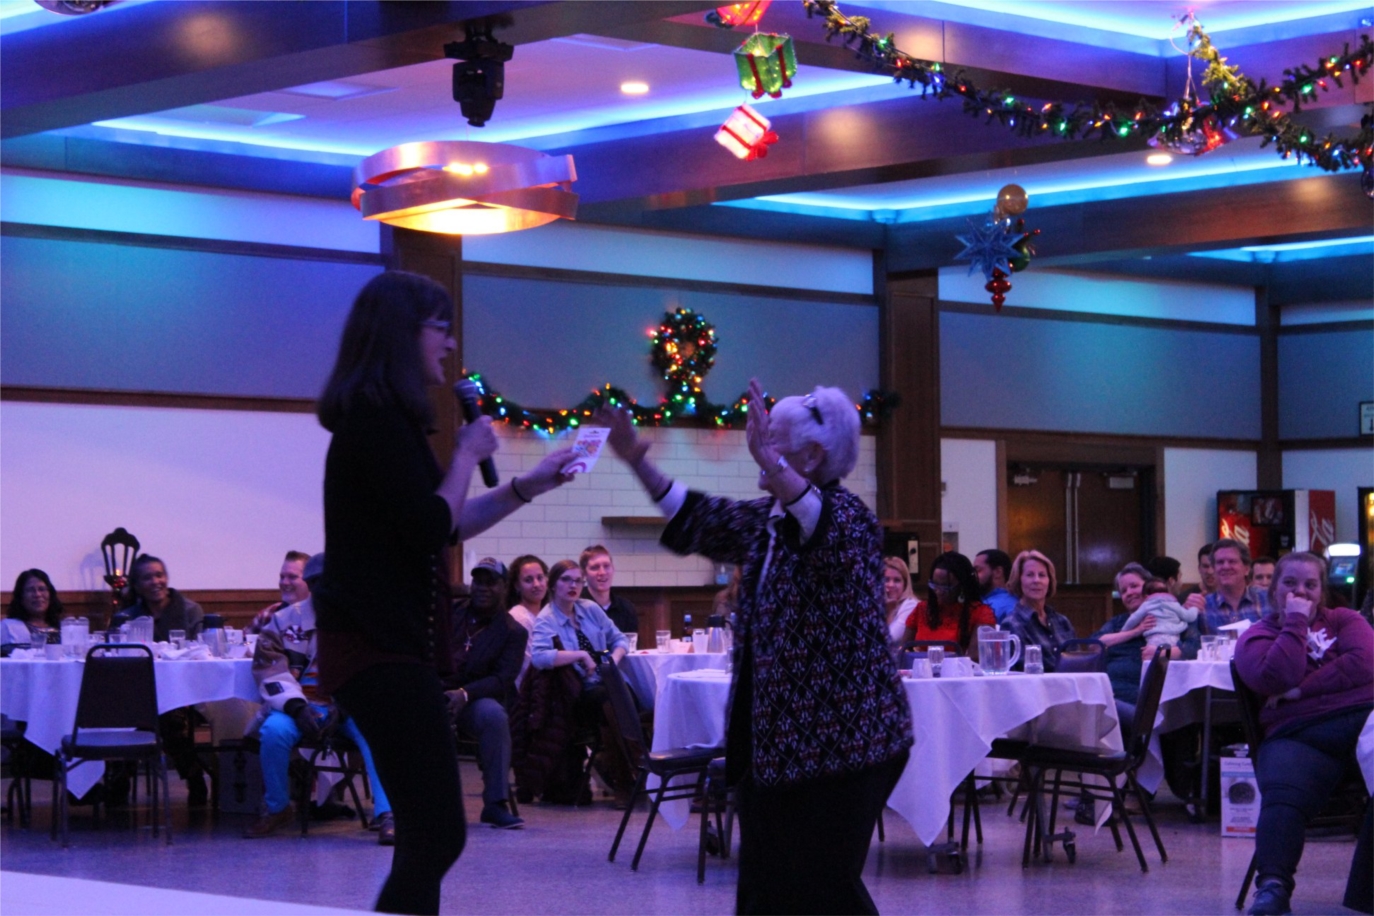 Celebrate the good times!  One of our communities enjoying themselves at their annual holiday party.